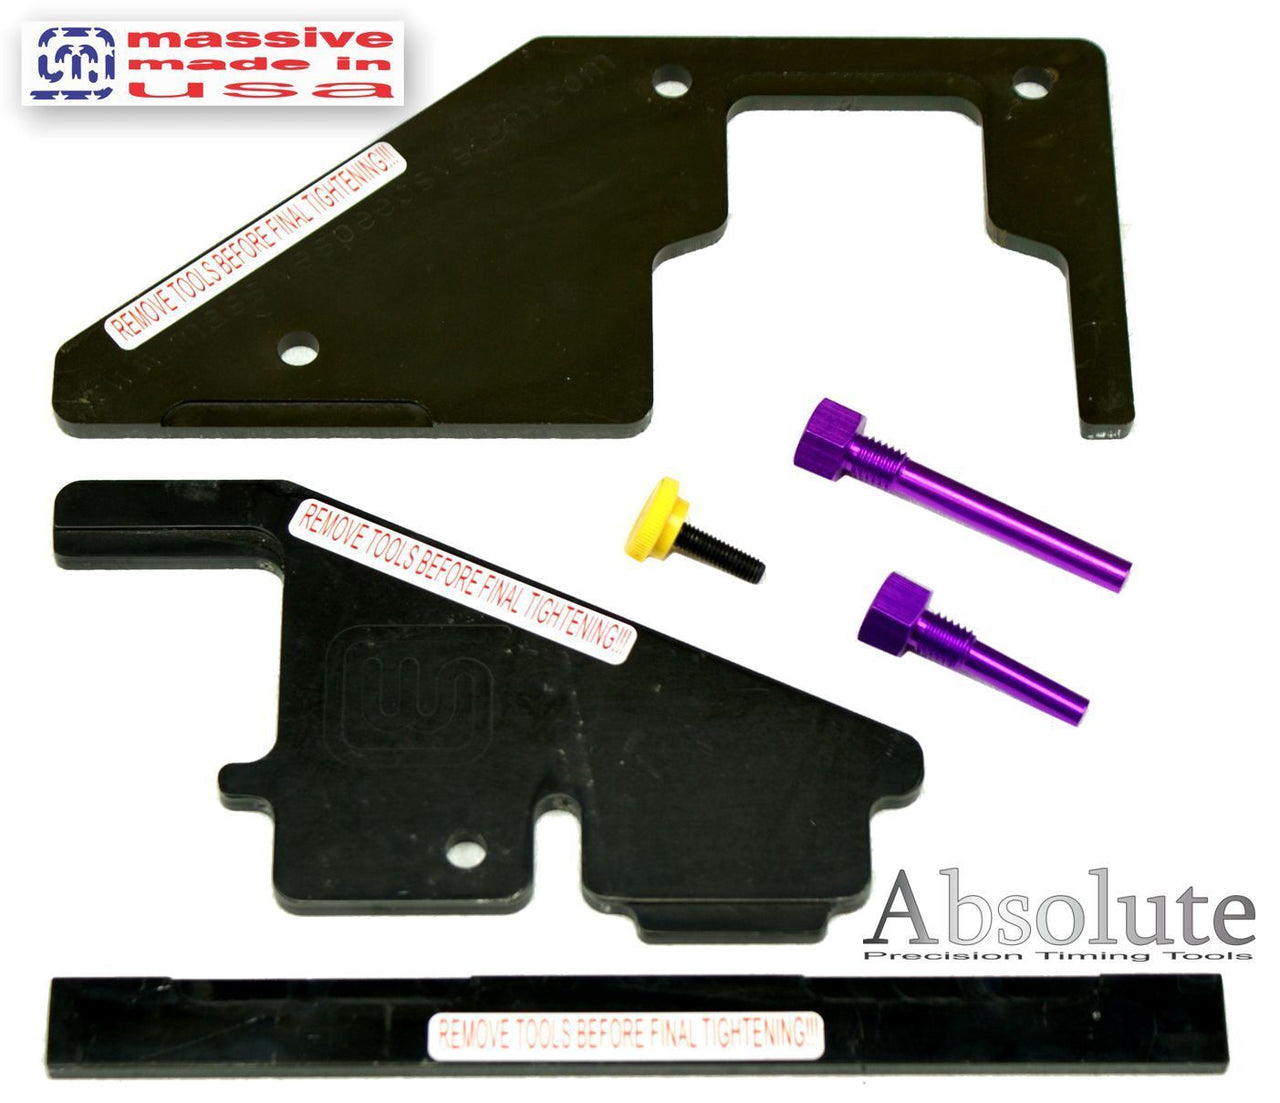 Massive Speed System Cam Timing Chain Alignment Tool Set Duratec MZR 2.0 2.3 2.5 Turbo DISI VCT